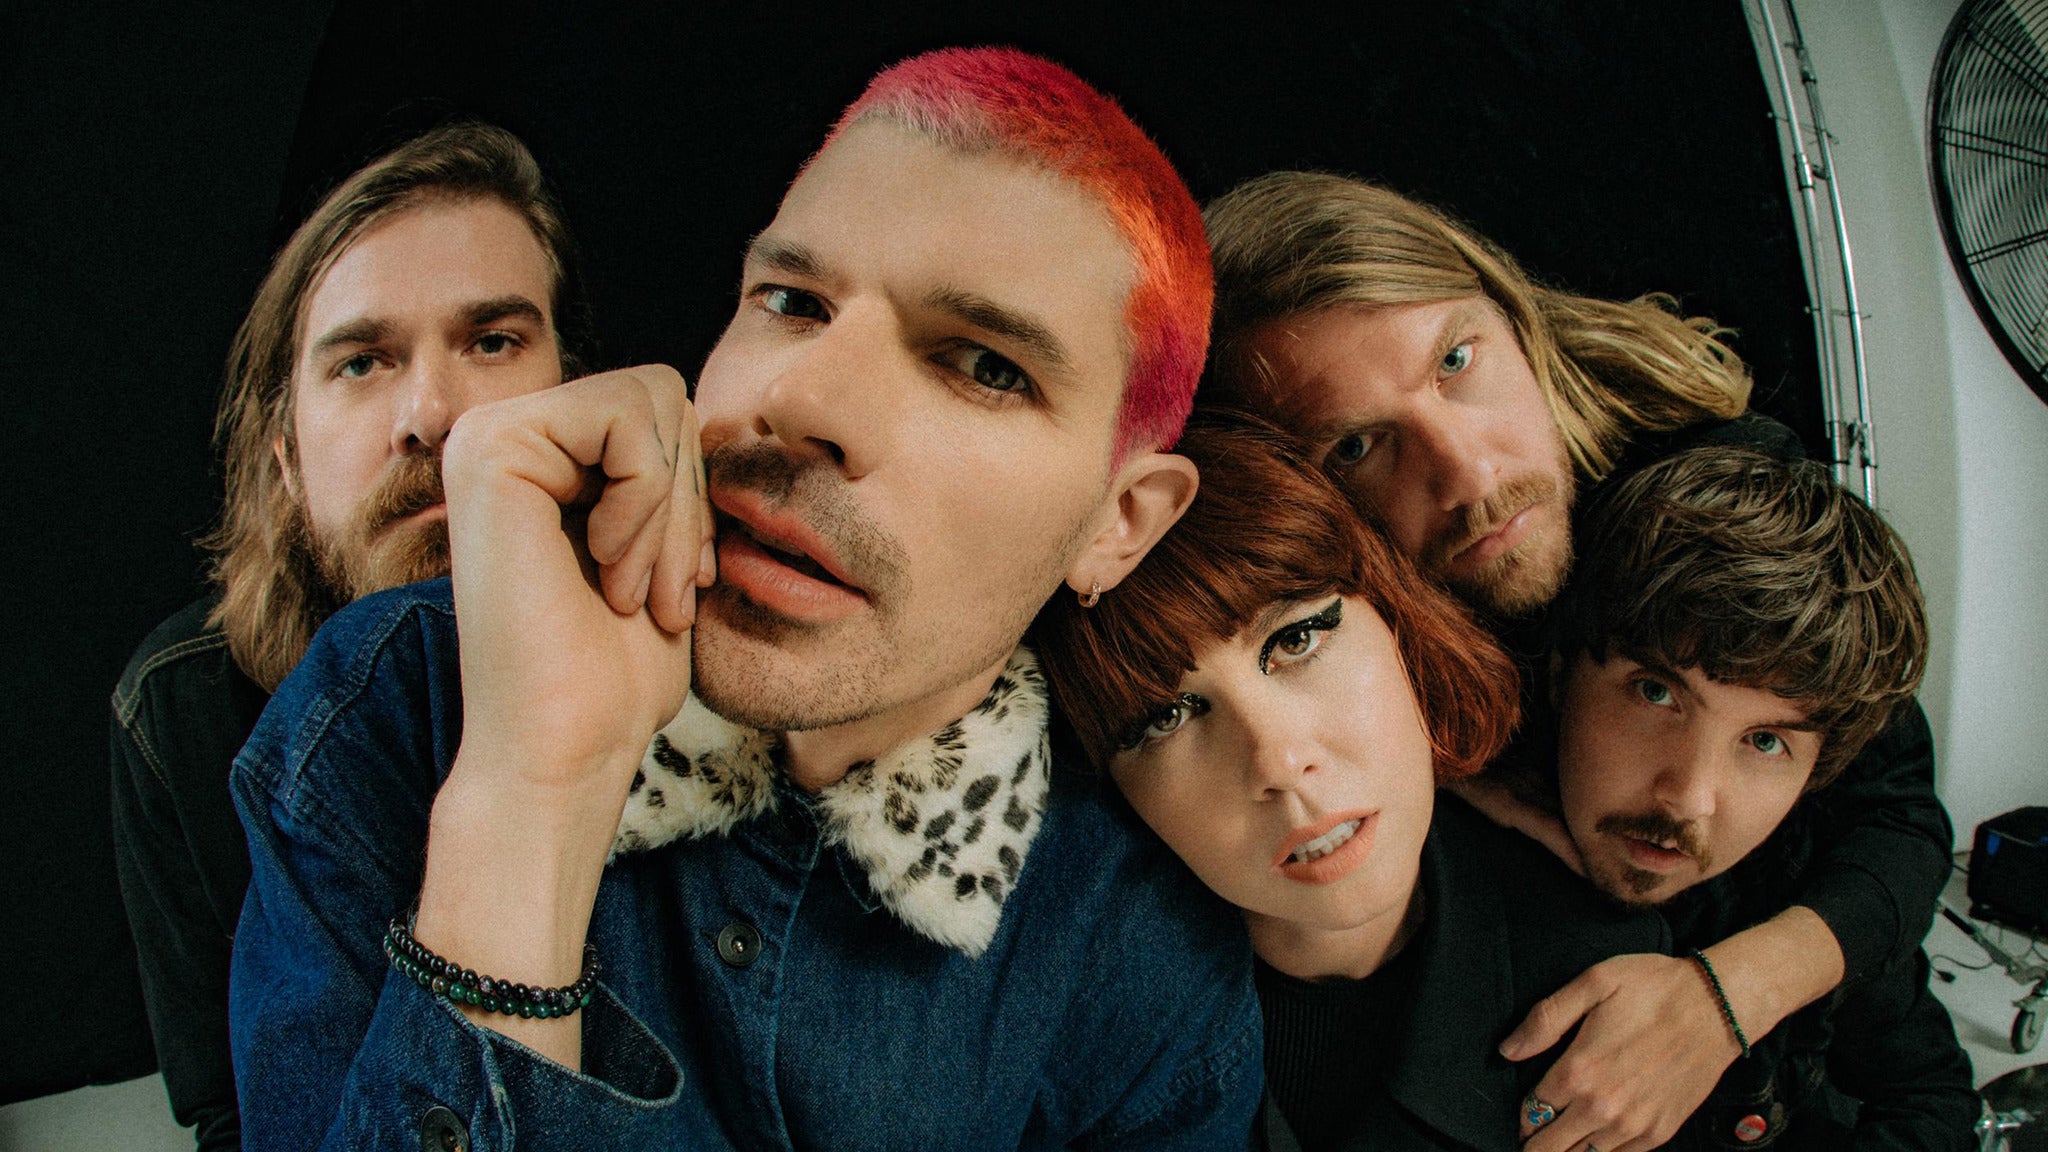 Grouplove - Never Trust A Happy Song 10th Anniversary in Hollywood promo photo for Live Nation presale offer code